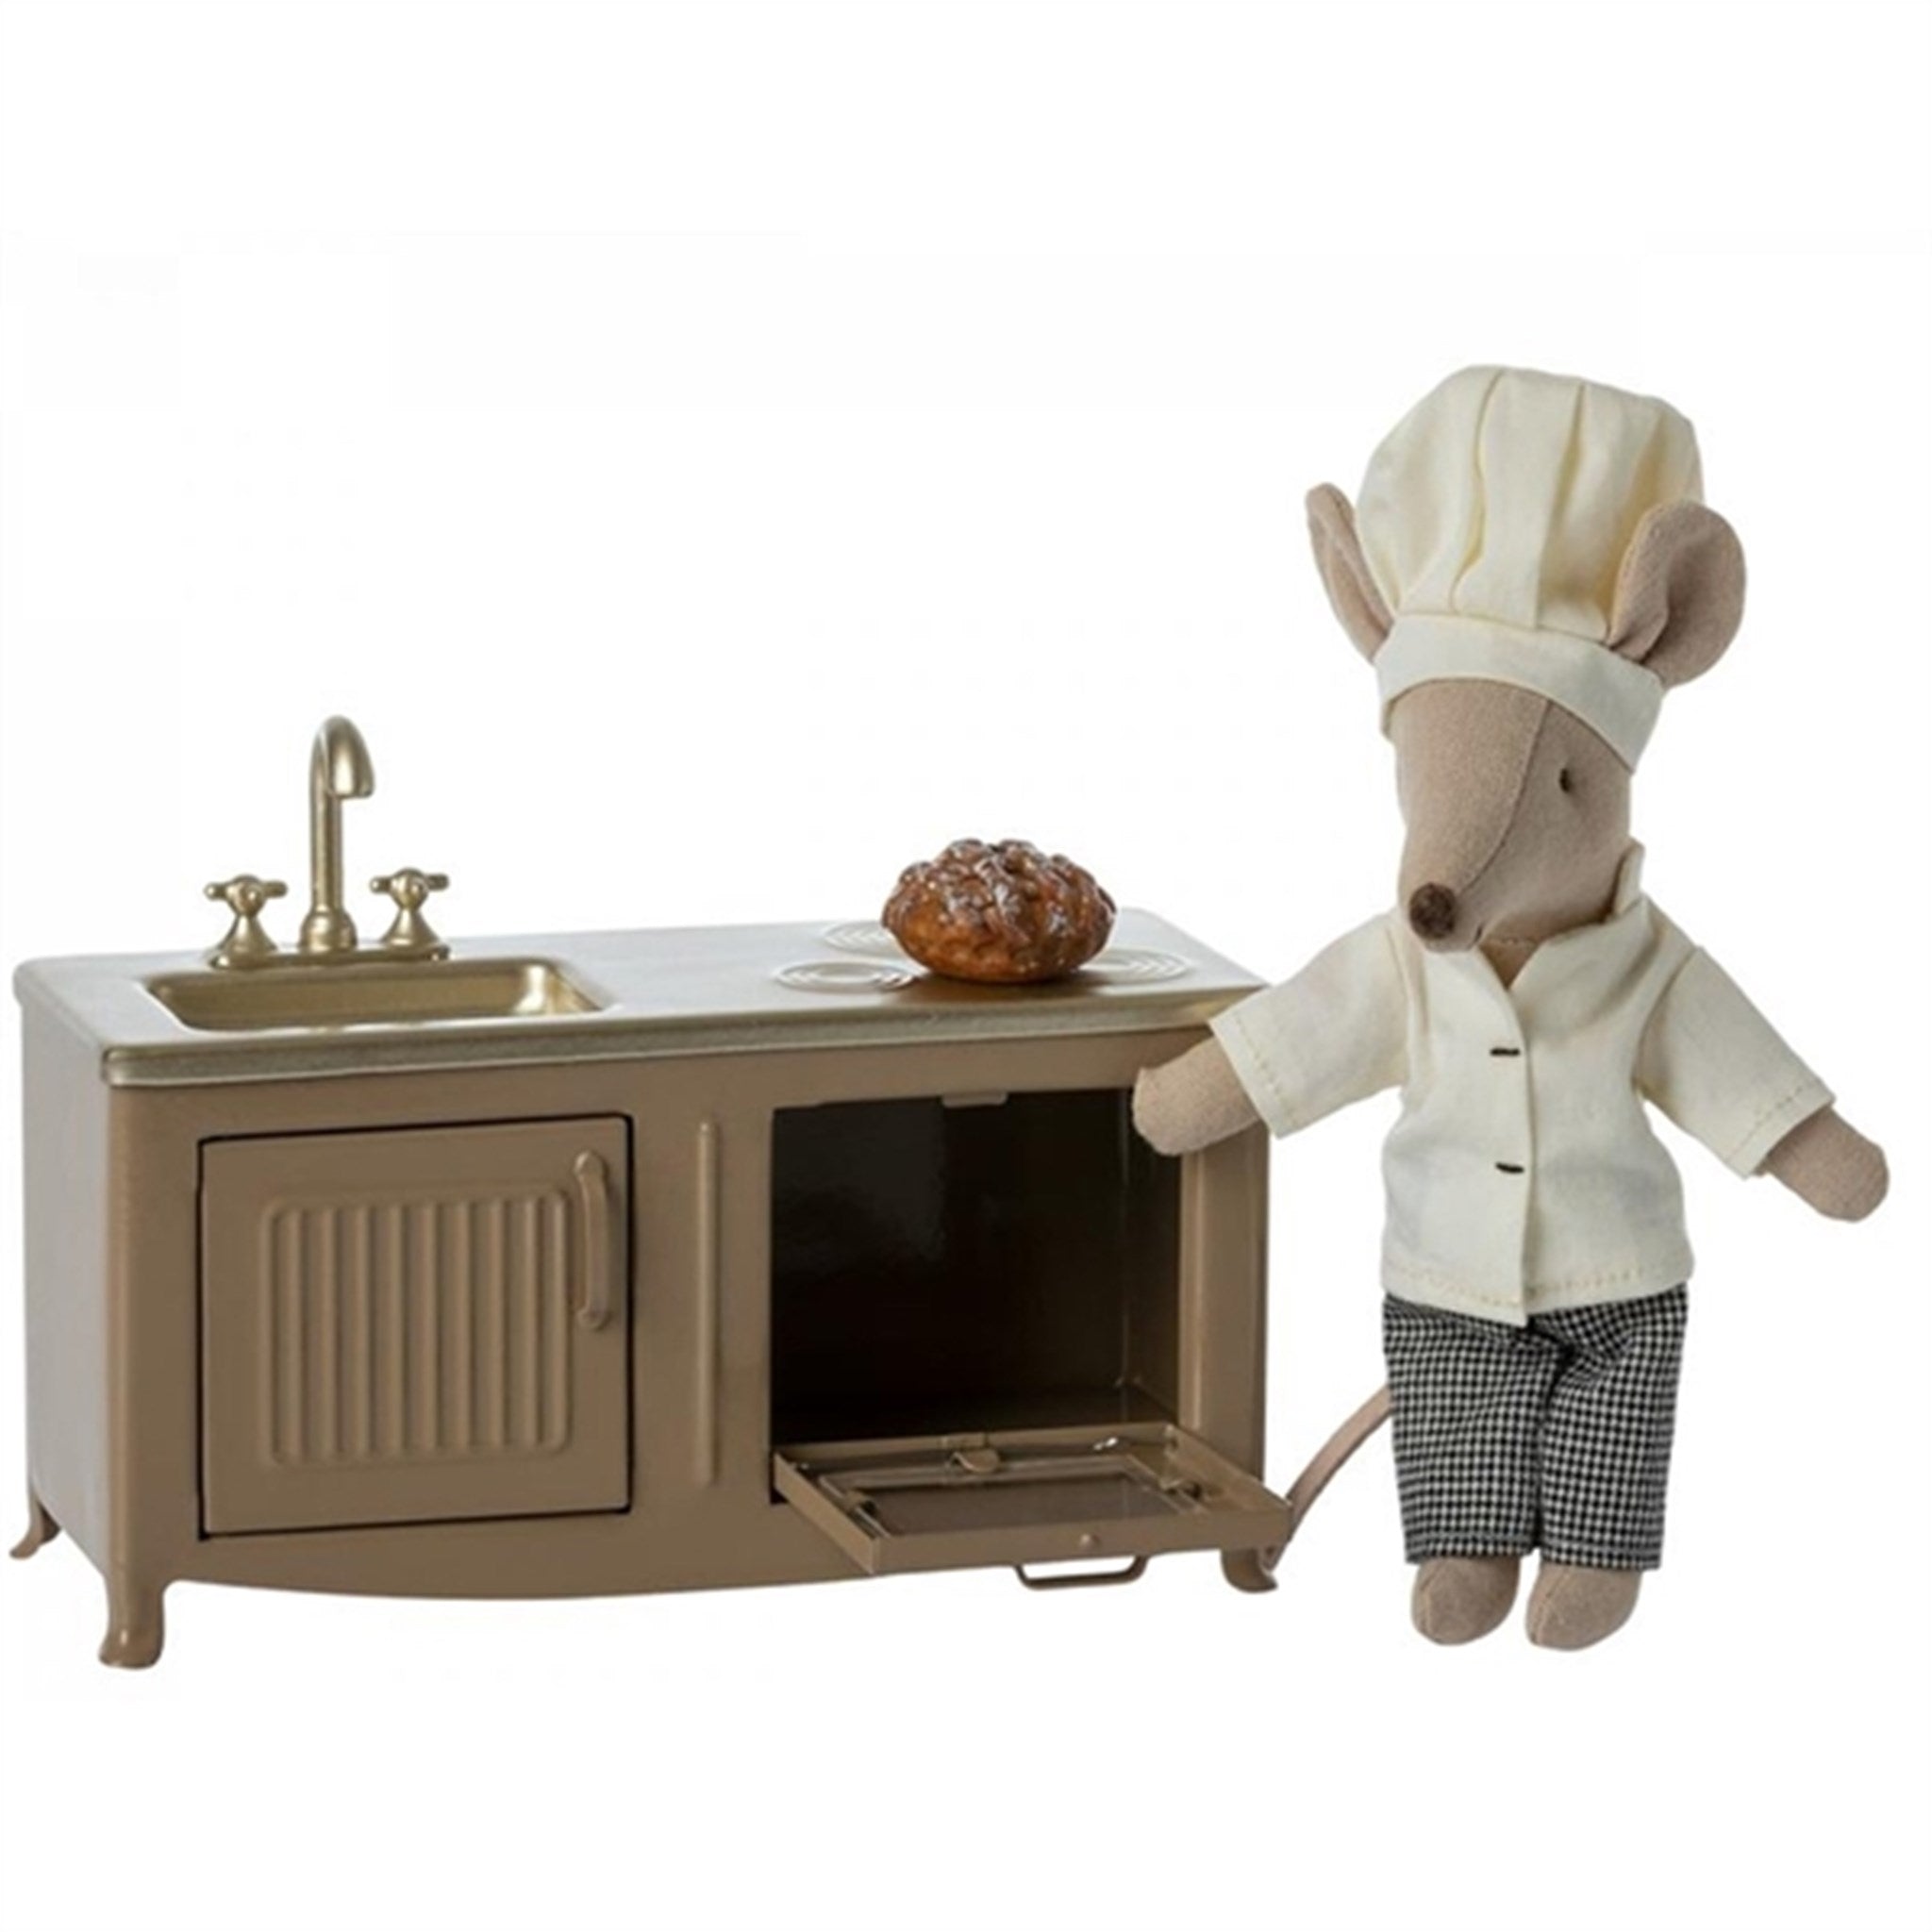 Maileg Kitchen, Mouse - Light Brown 3